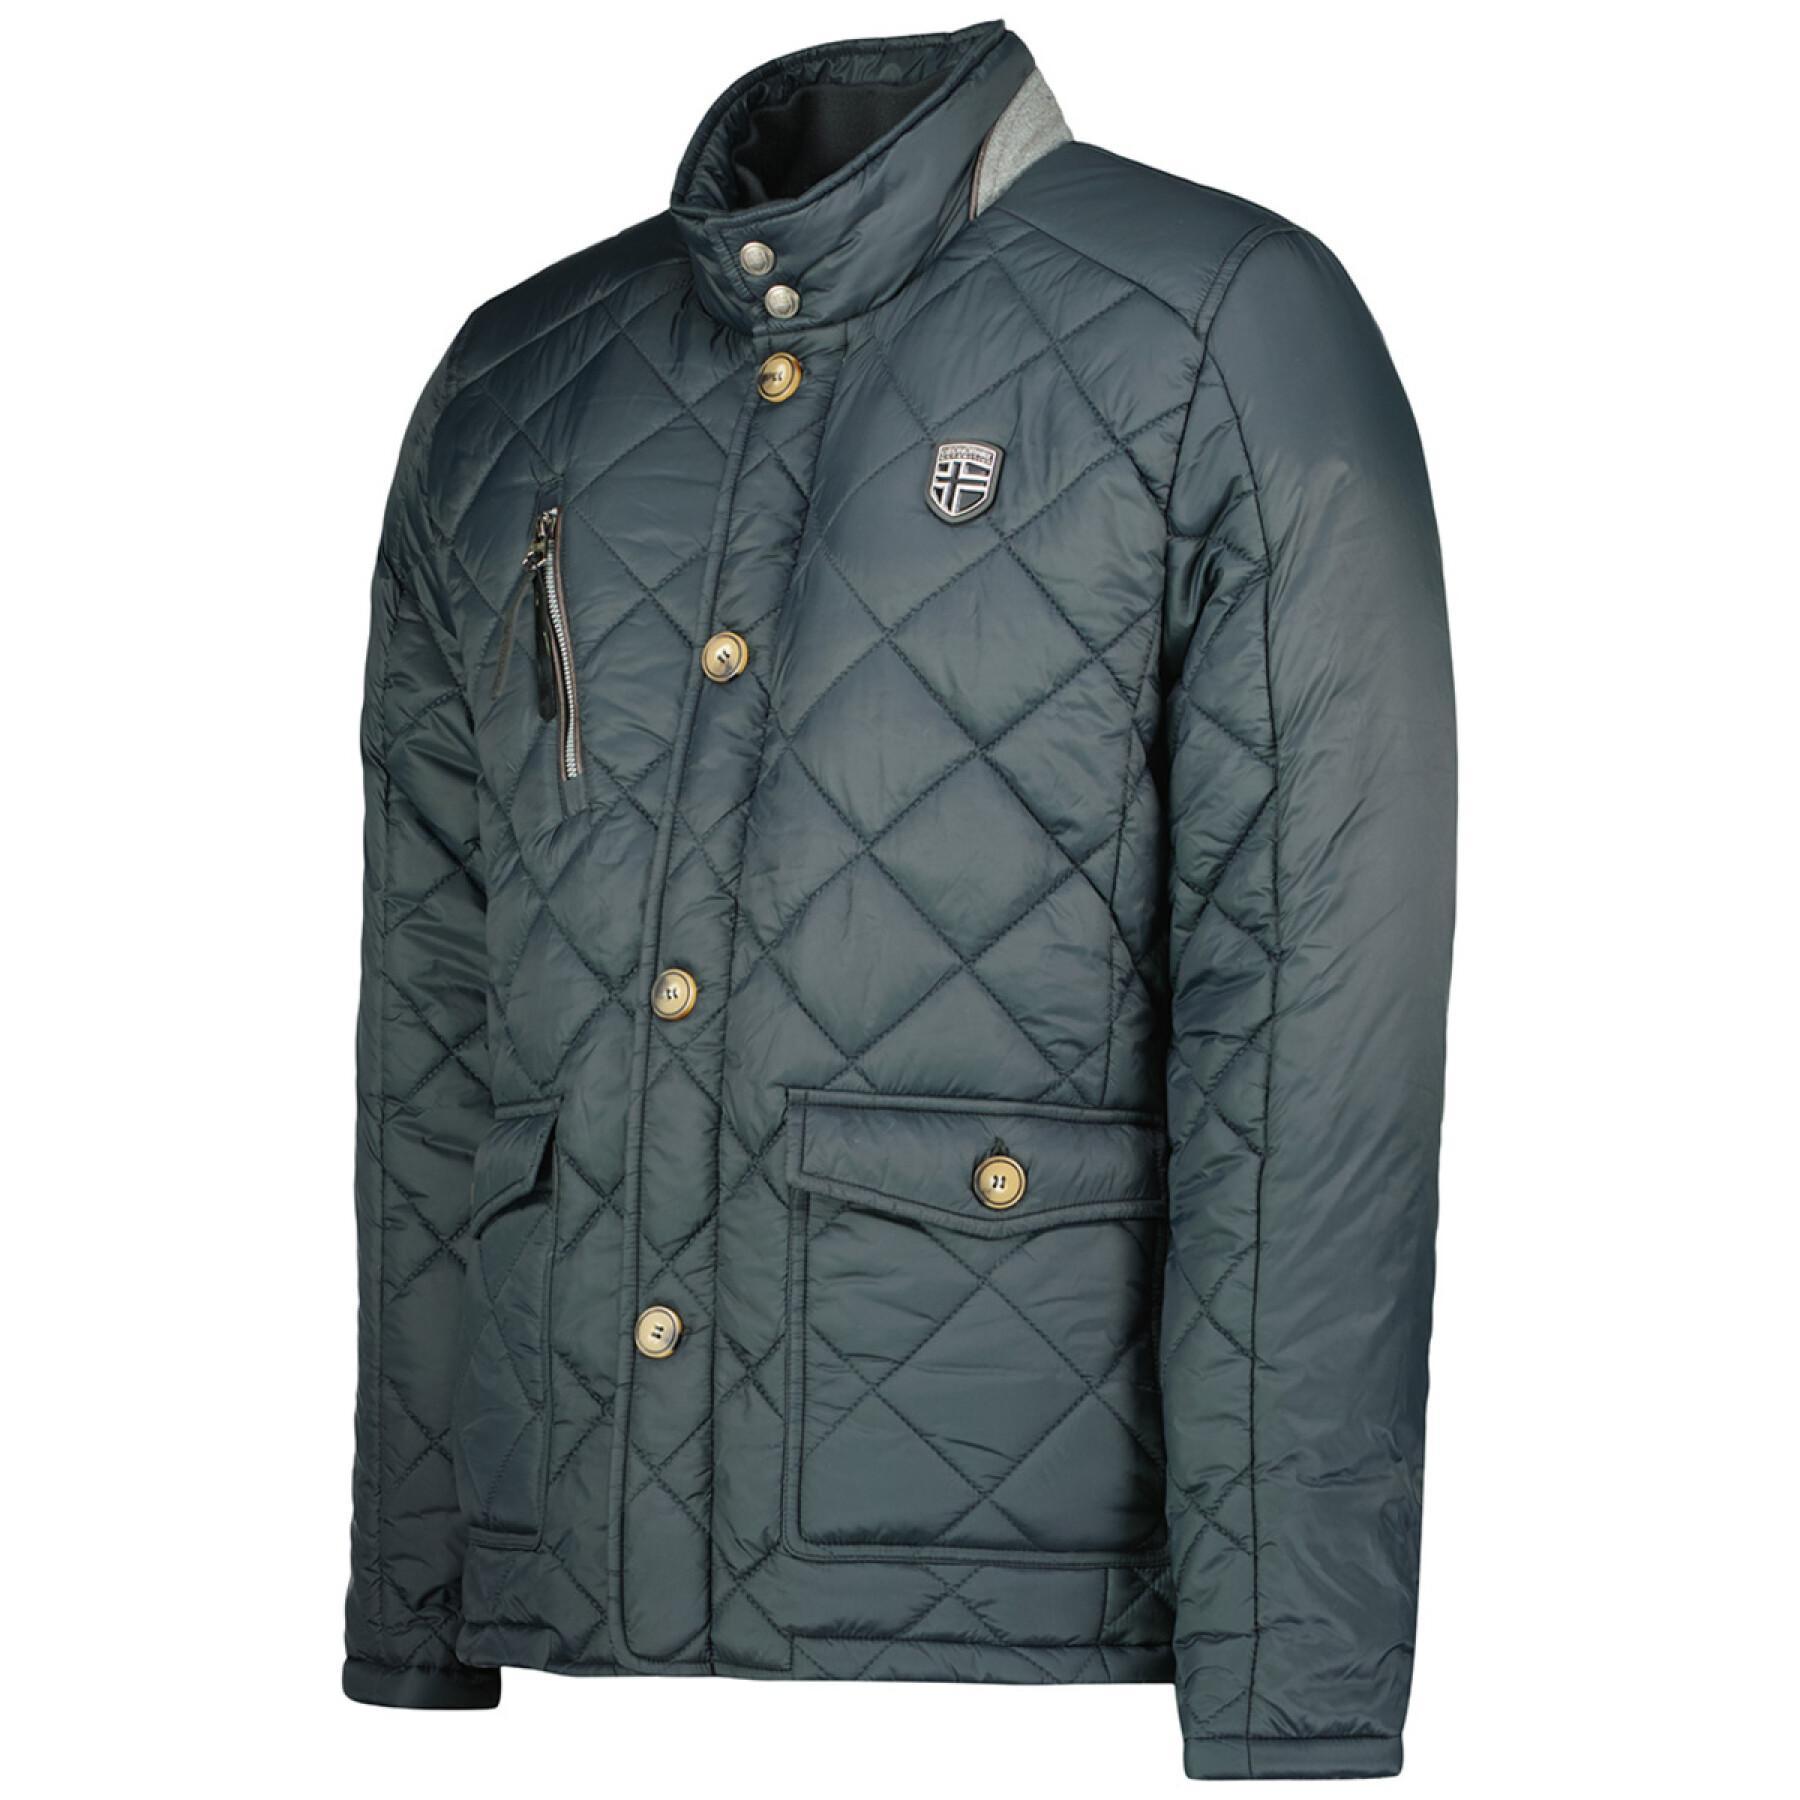 Jacket Geographical Norway Cargue Db Eo